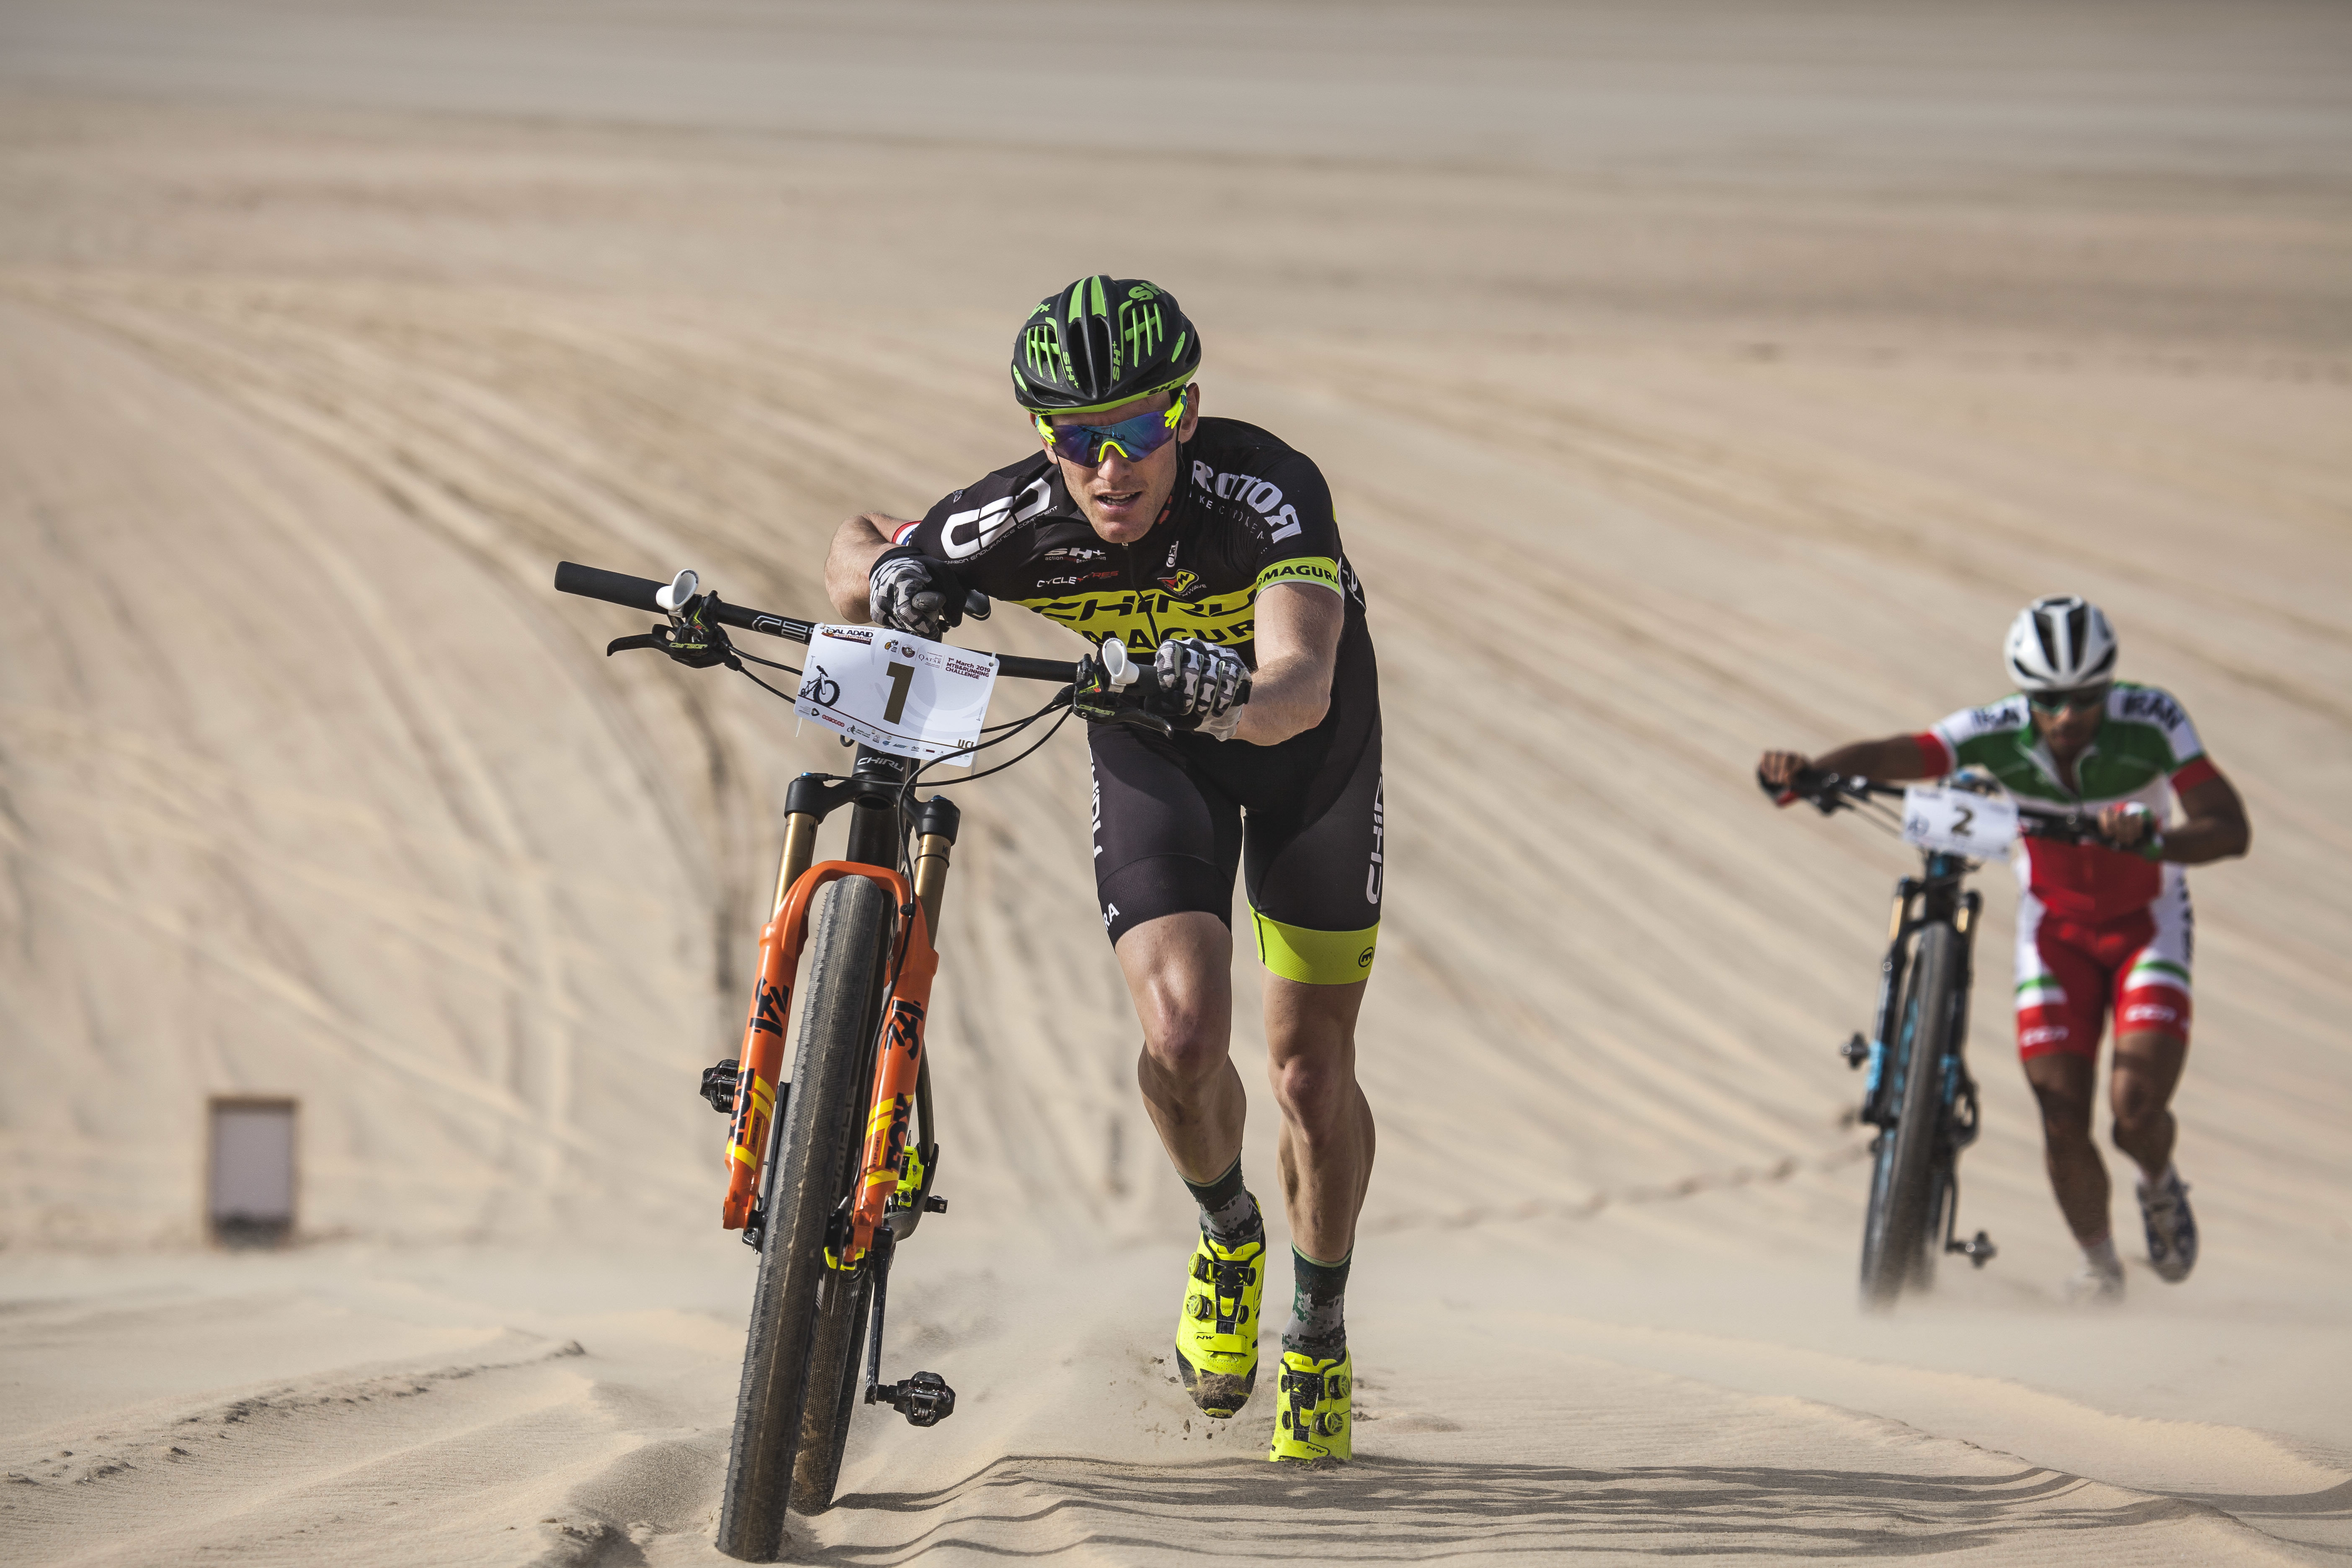 ICARUS Sports flies to Qatar for the fifth and most demanding edition of Al Adaid Desert Challenge